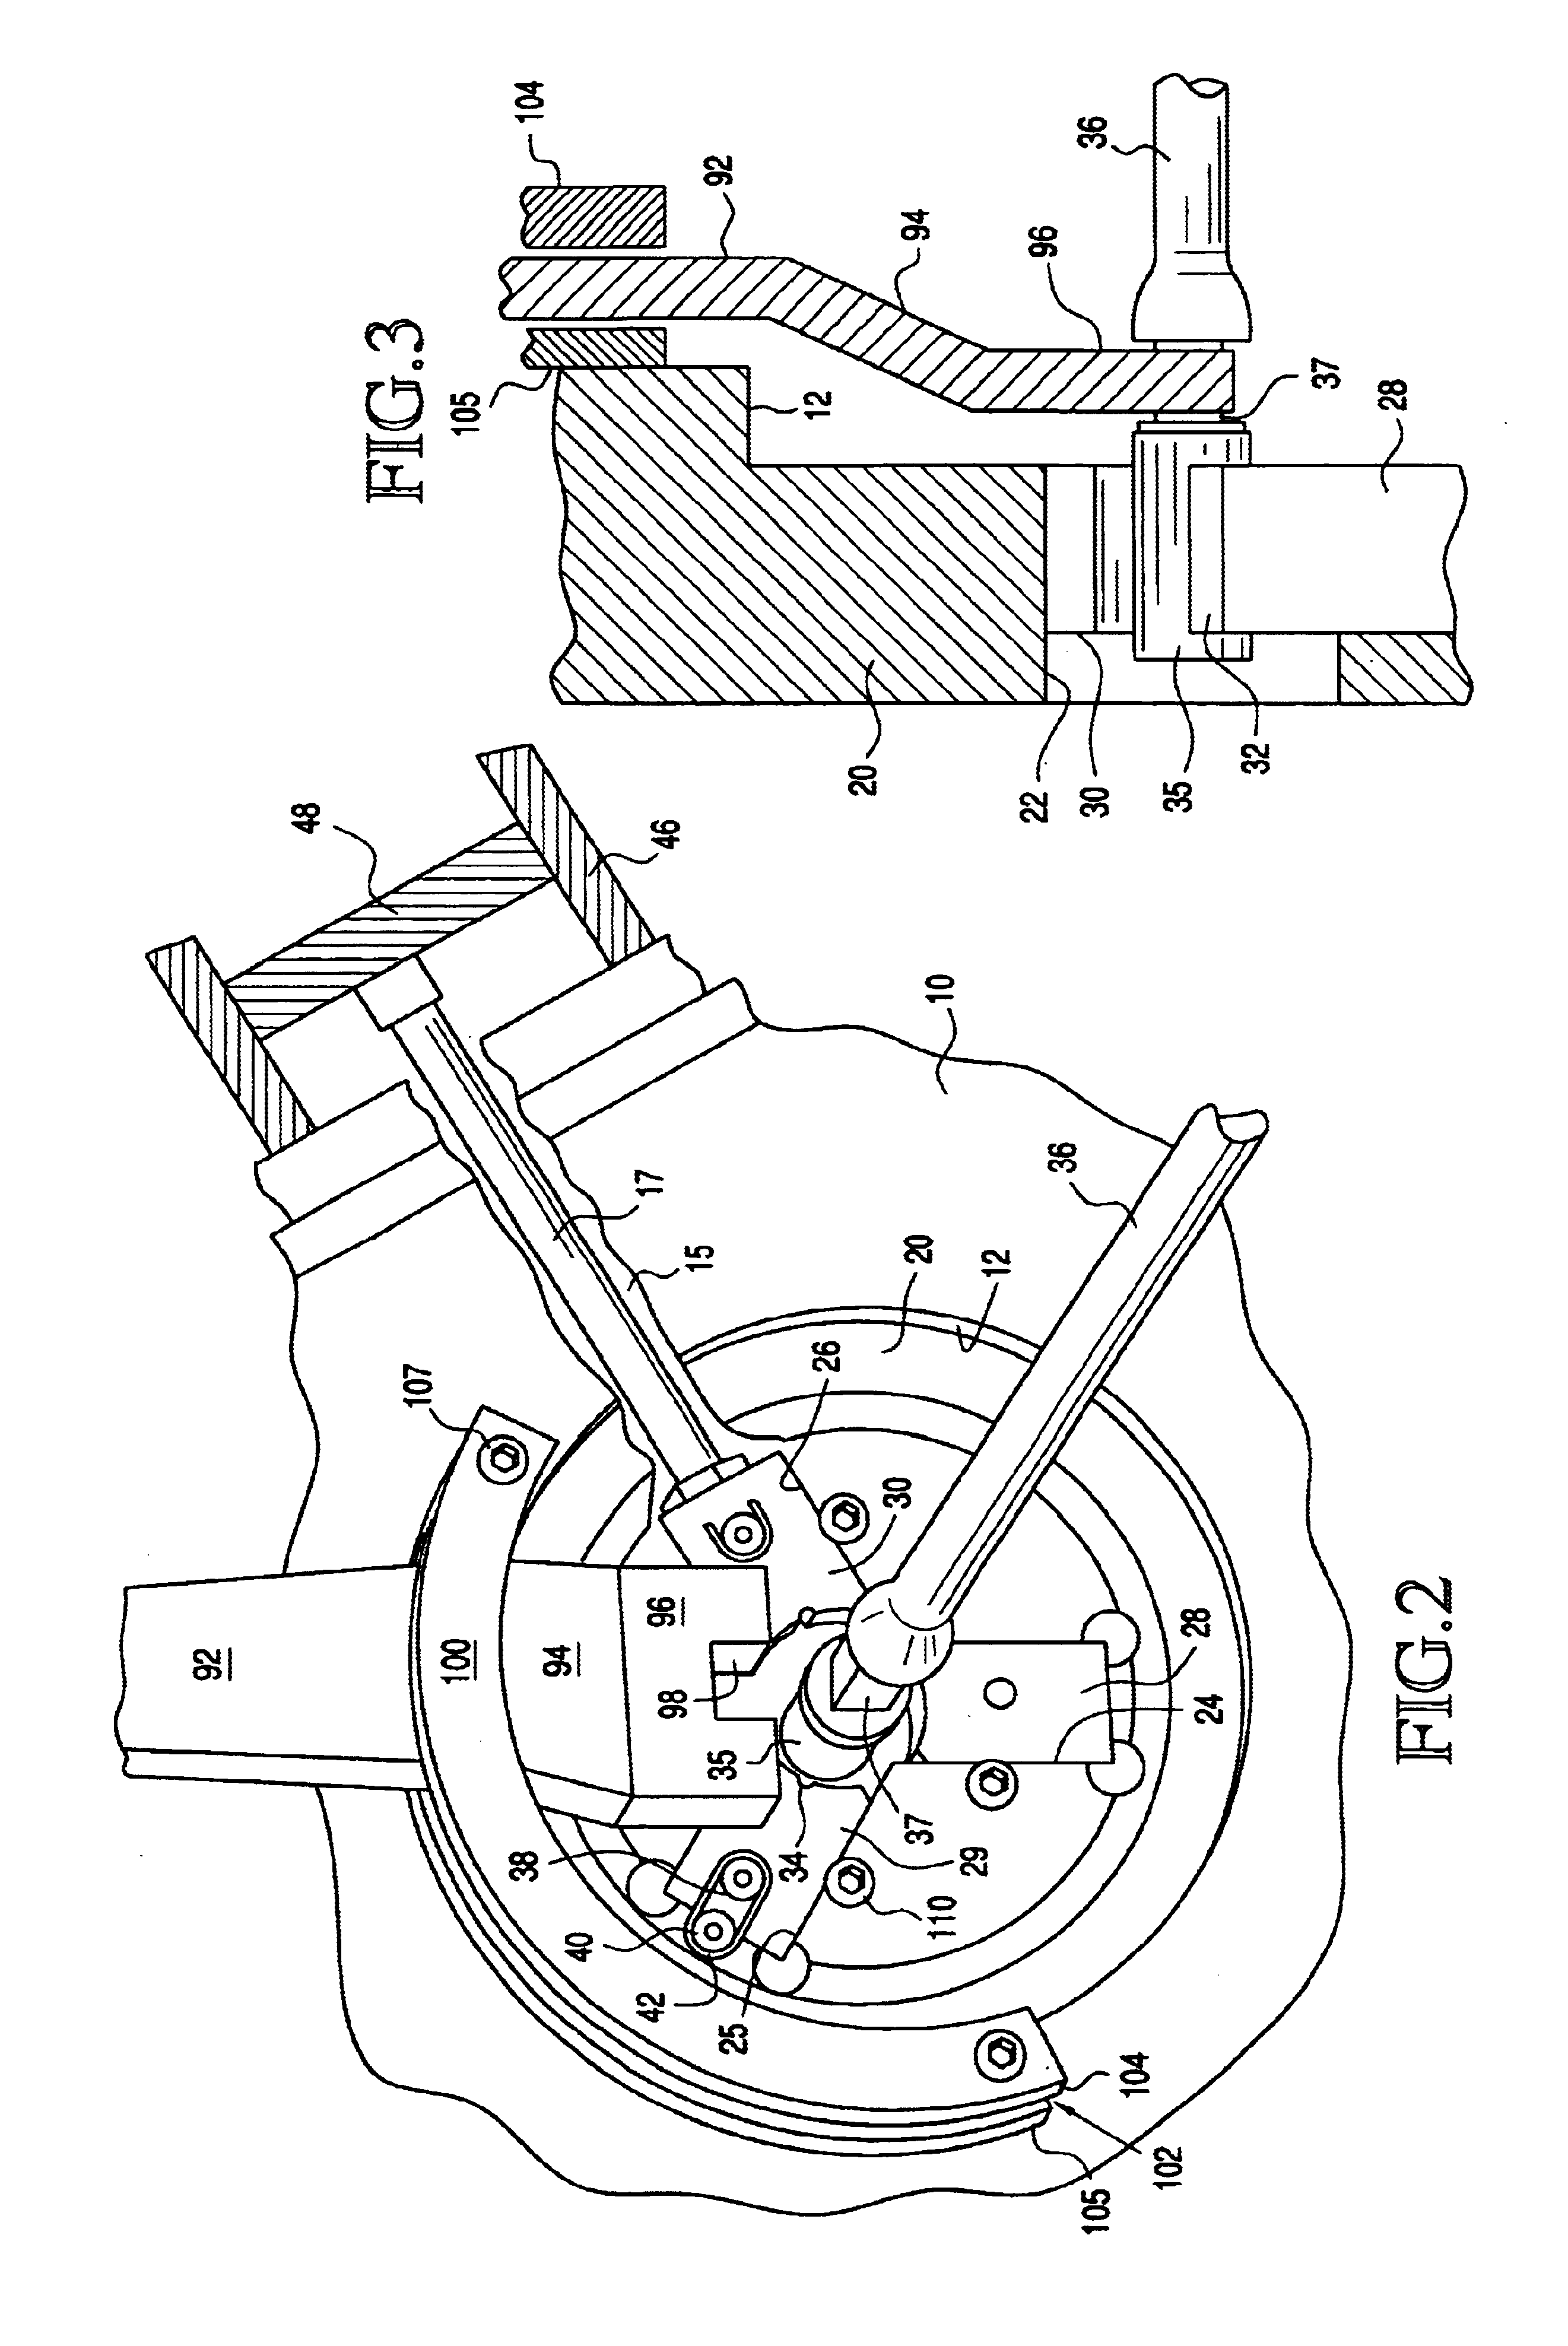 Threaded connection engagement and disengagement system and method